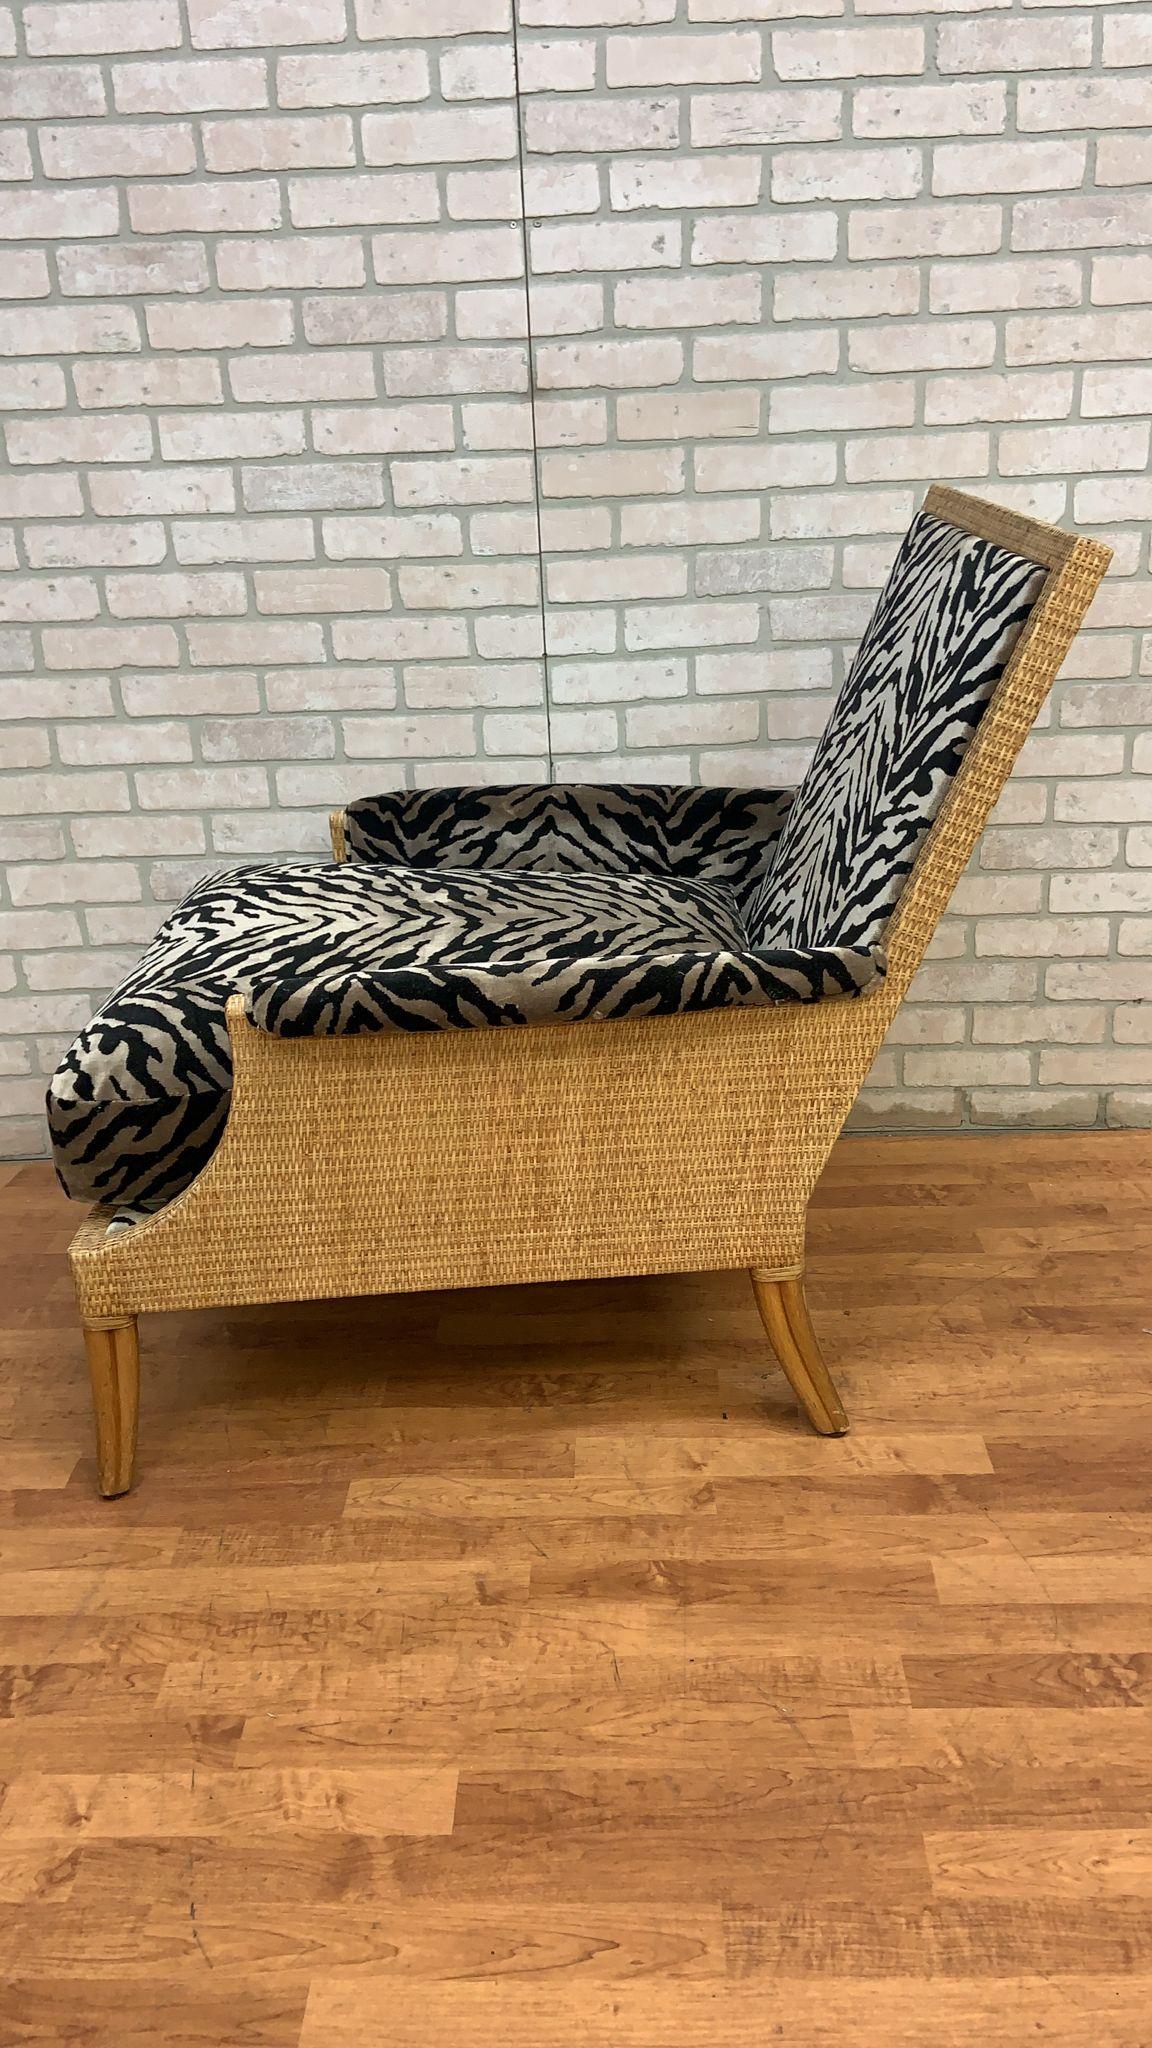 Vintage McGuire Rattan and Wicker Umbria Lounge Chair with Ottoman, 2 Piece Set 5